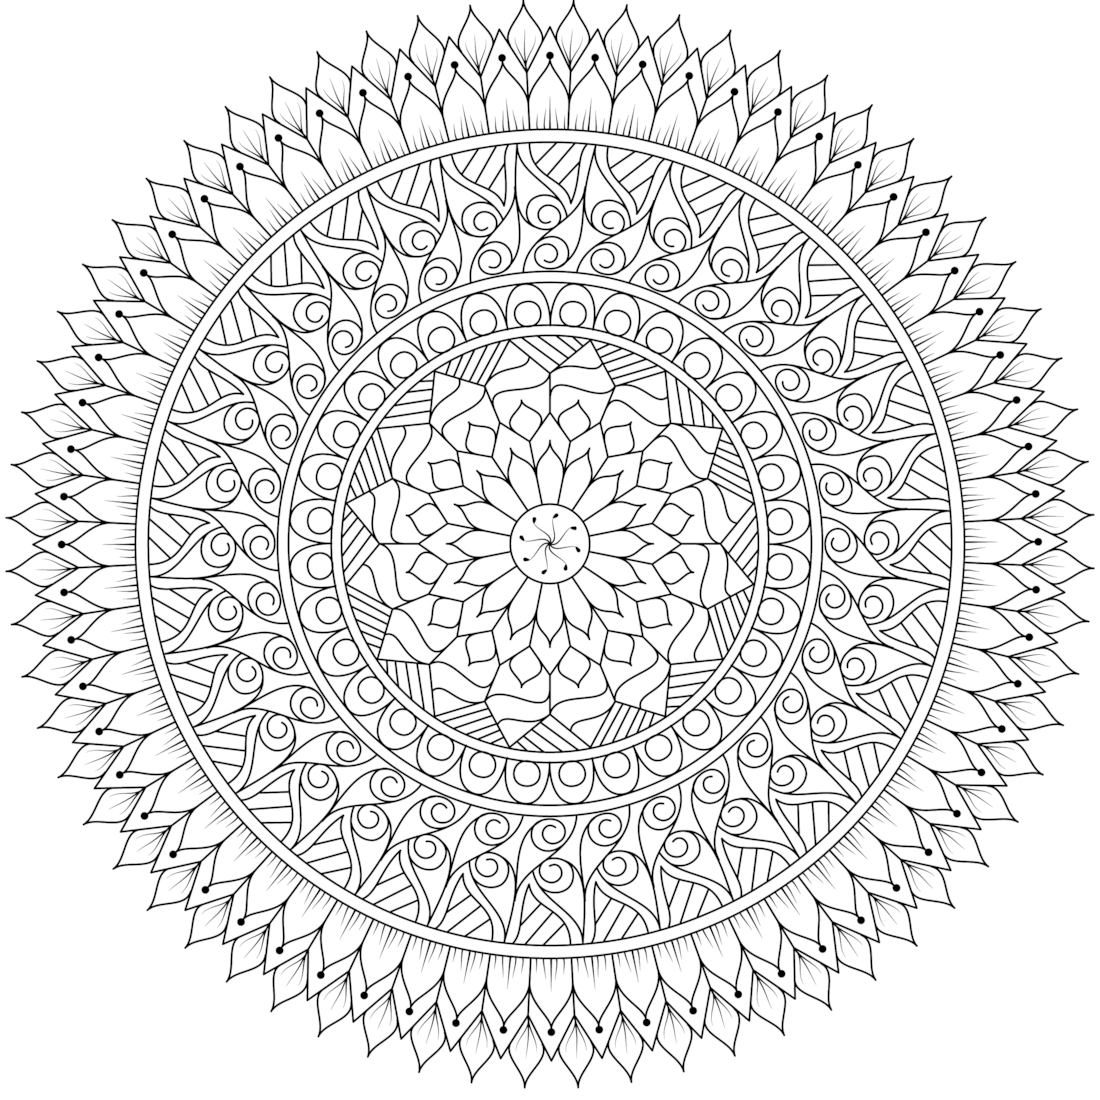 Detailed Pattern Coloring Pages For Adults / In fact, coloring books